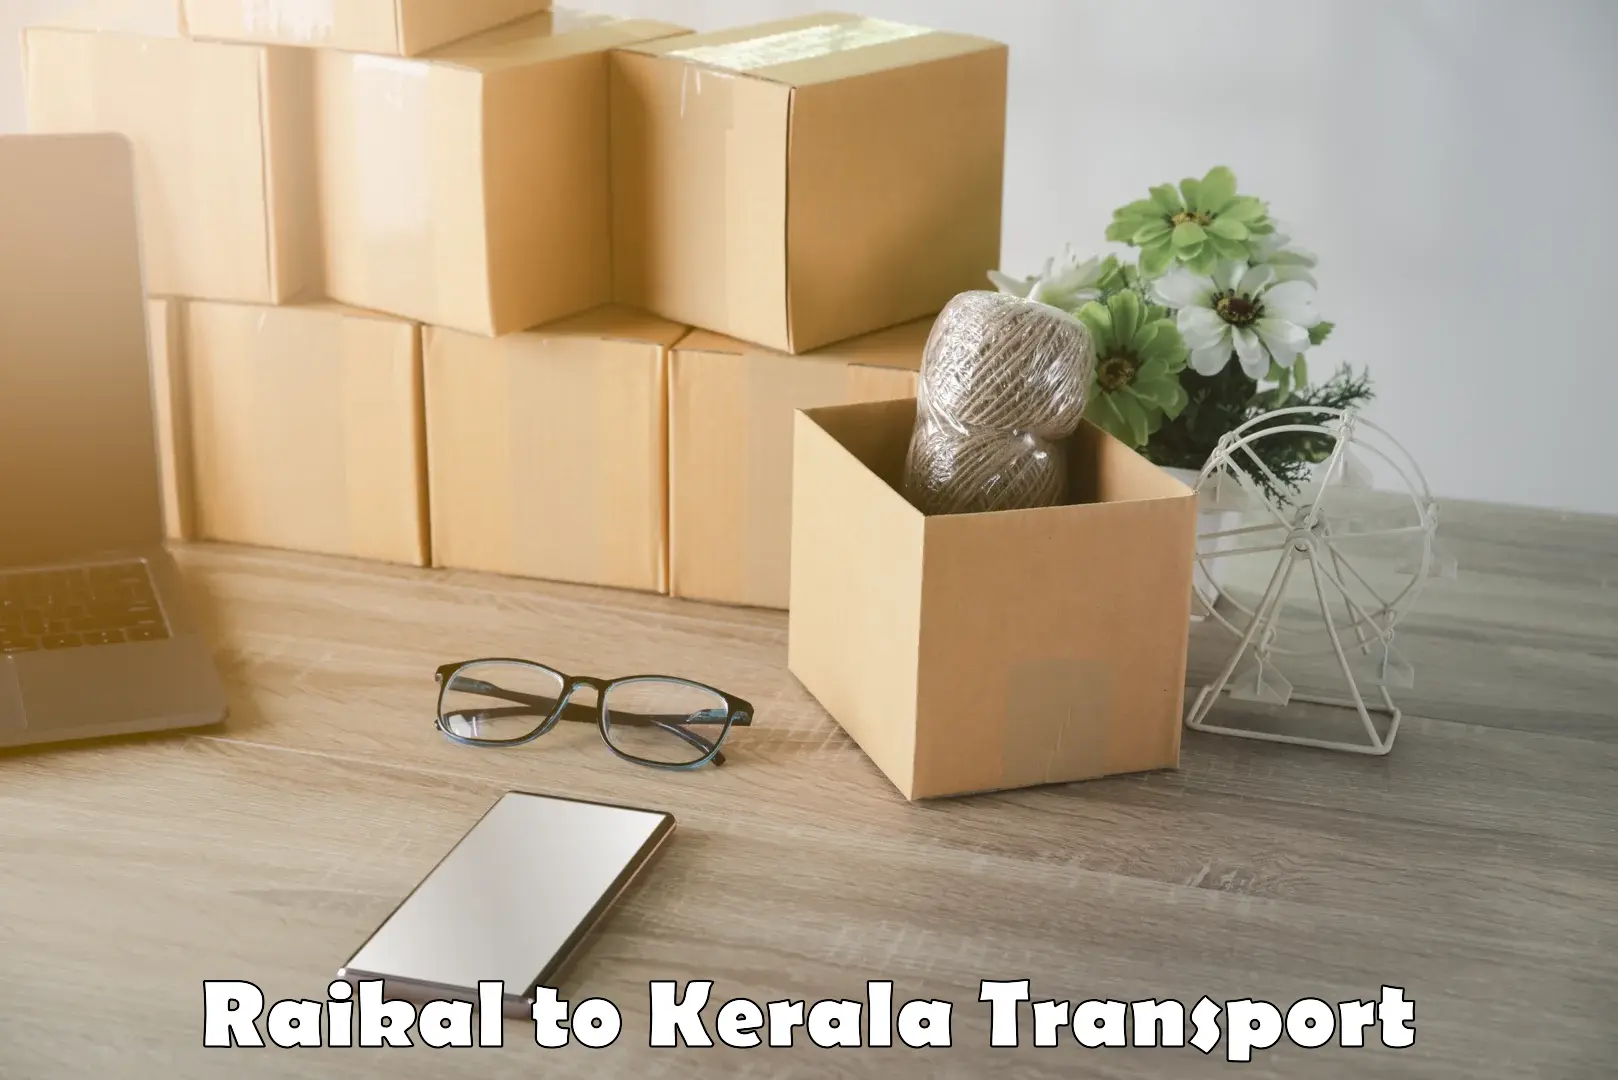 Furniture transport service Raikal to Cochin University of Science and Technology